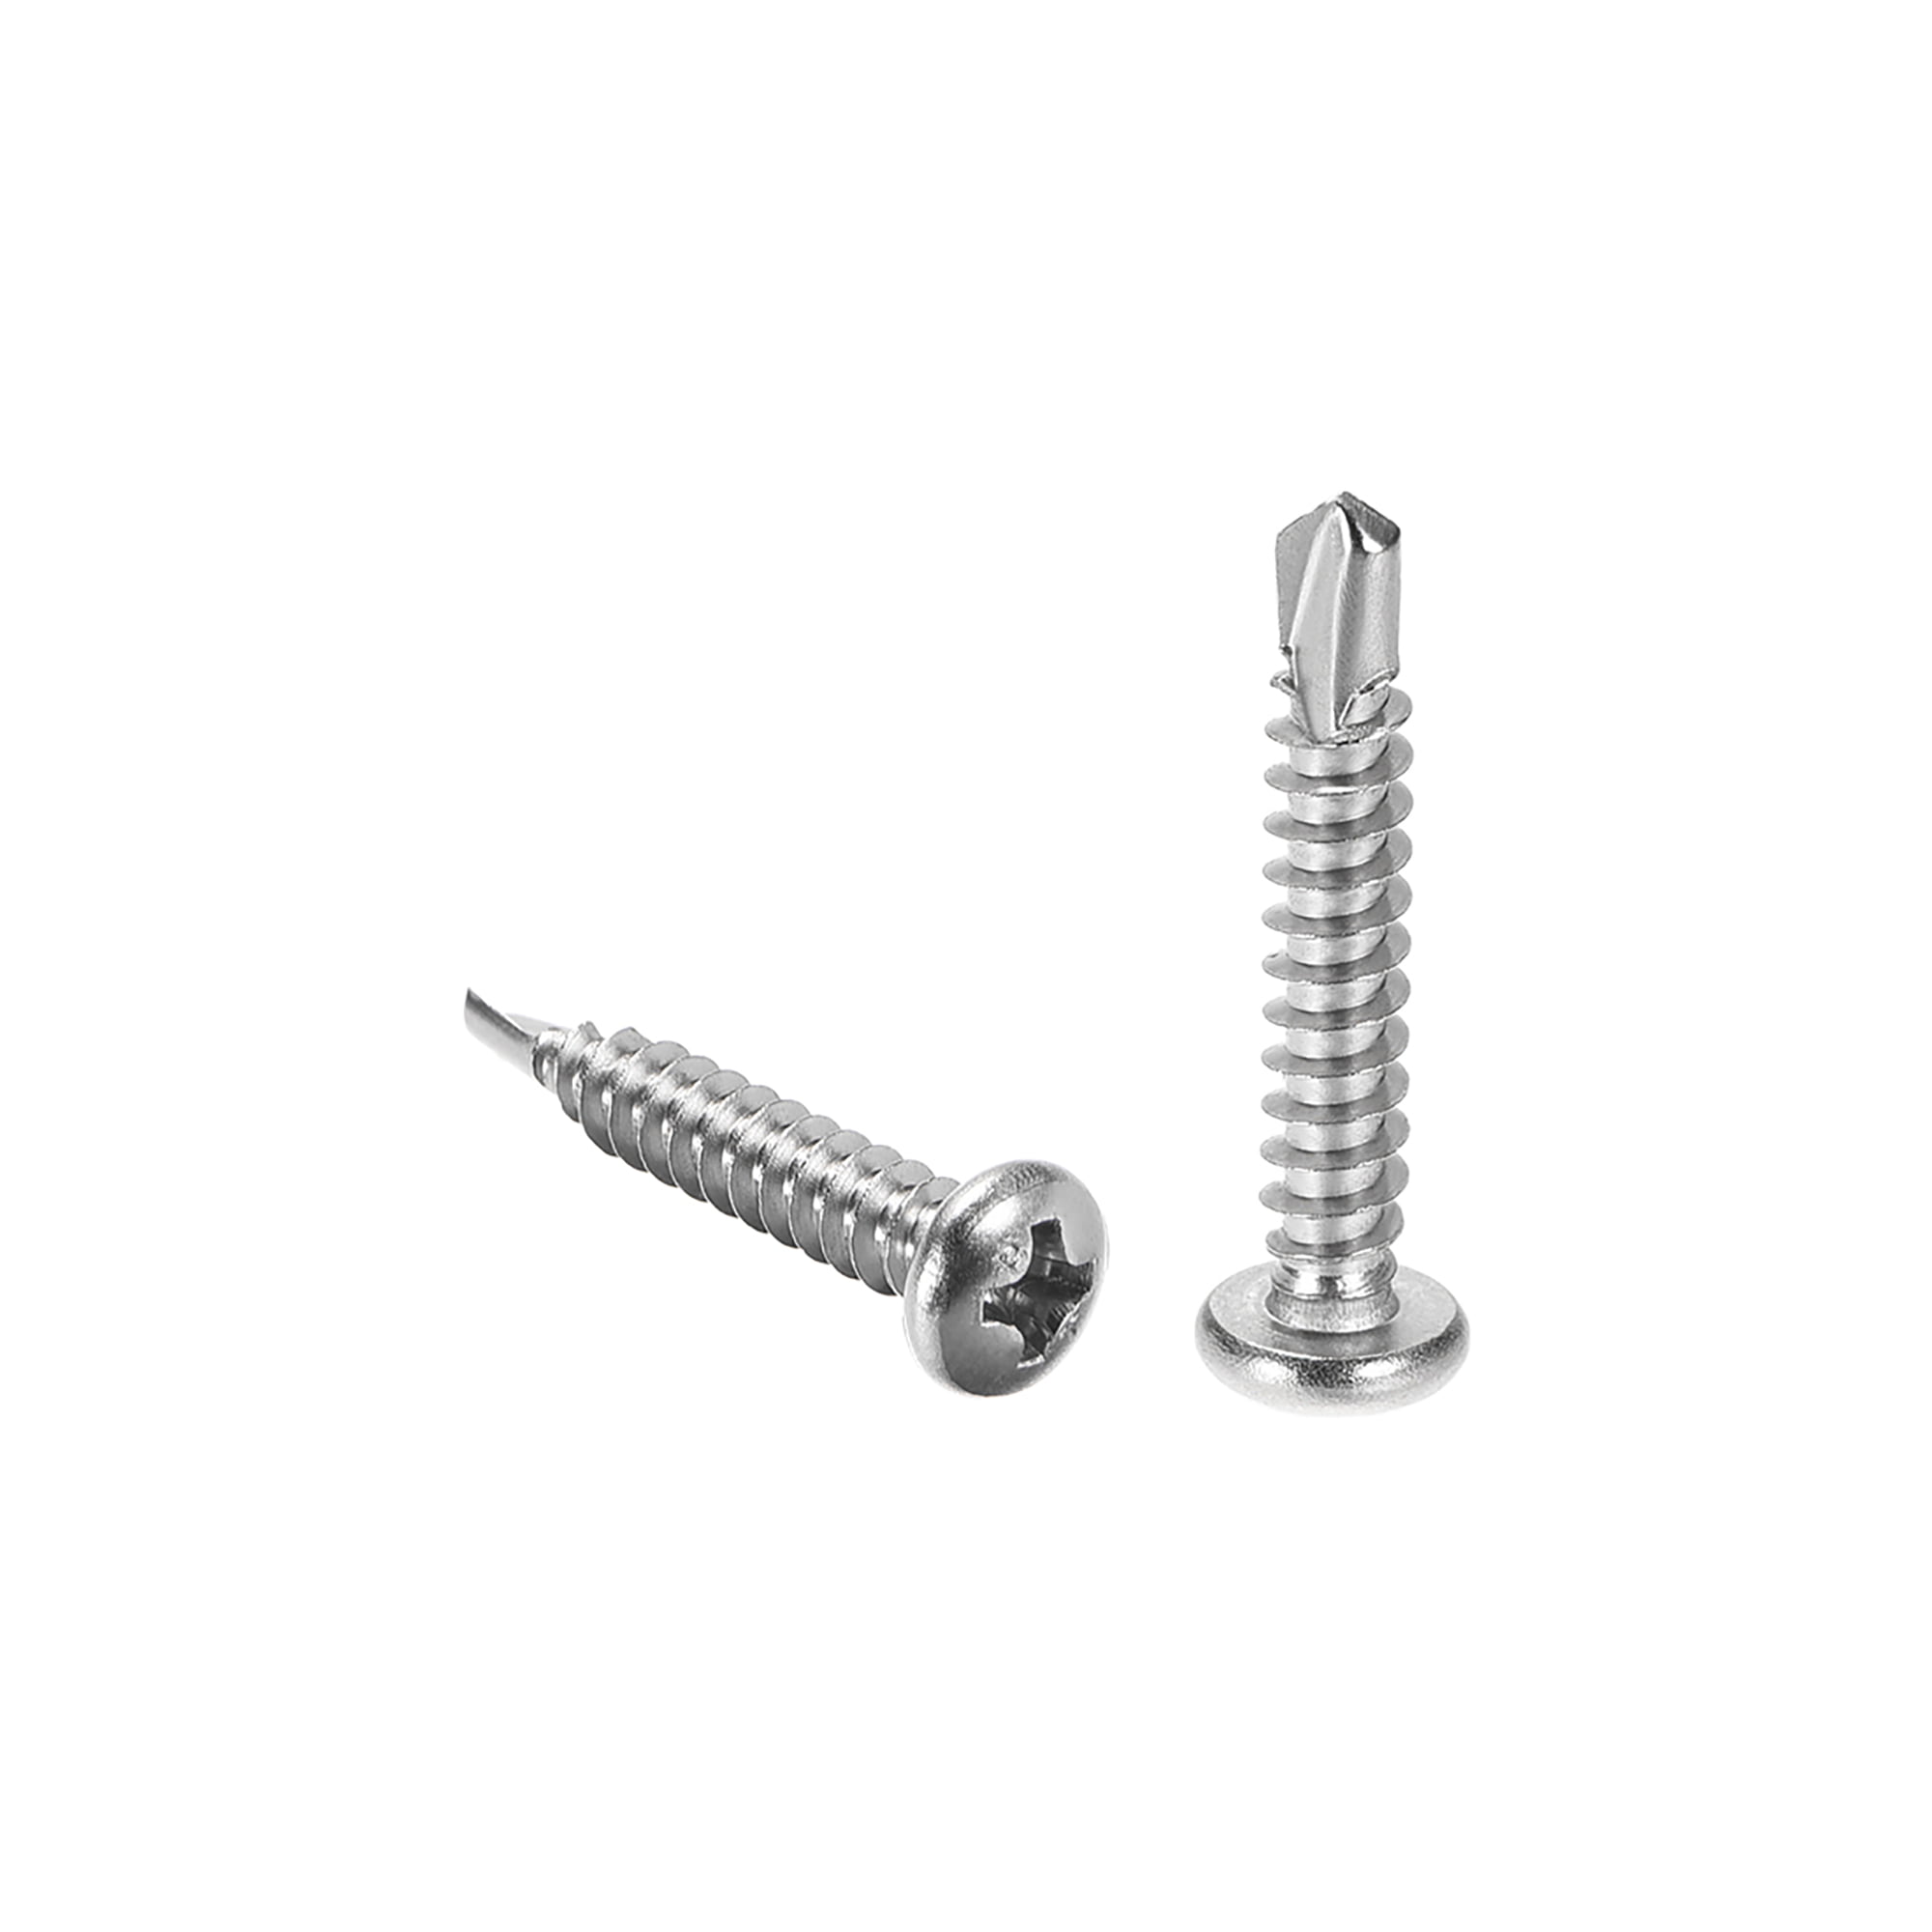 20 pcs Self-Drilling Screws #10 X 1 AISI 410 Stainless Steel Pan Phillips Drive 